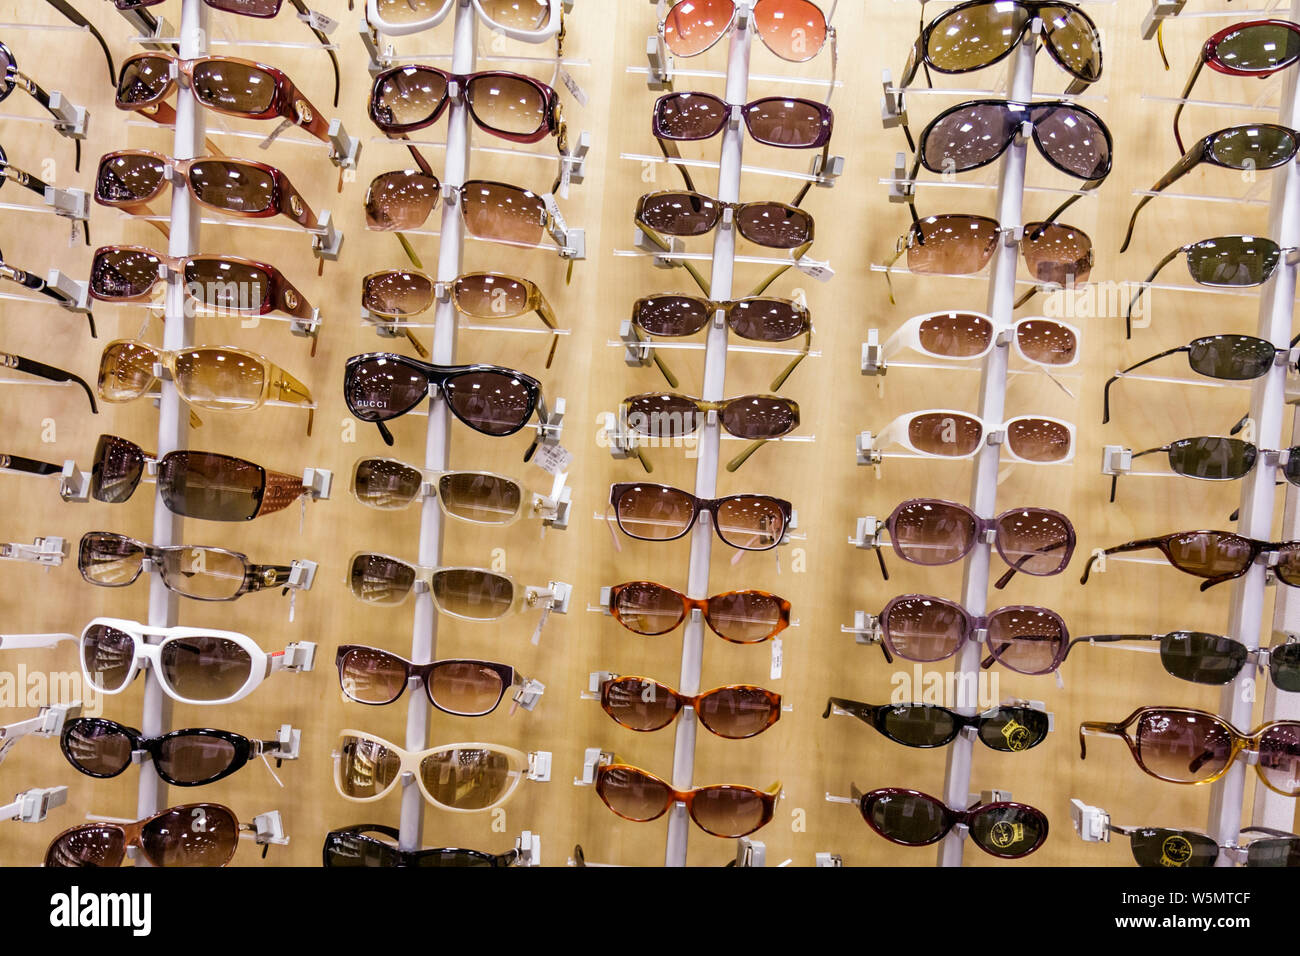 Fort Ft. Lauderdale Florida,Coral Springs,Sawgrass Mall,Neiman Marcus,Last Call,store chain,outlet,upmarket,eyeglasses,sunglasses,frame,tinted lens,di Stock Photo